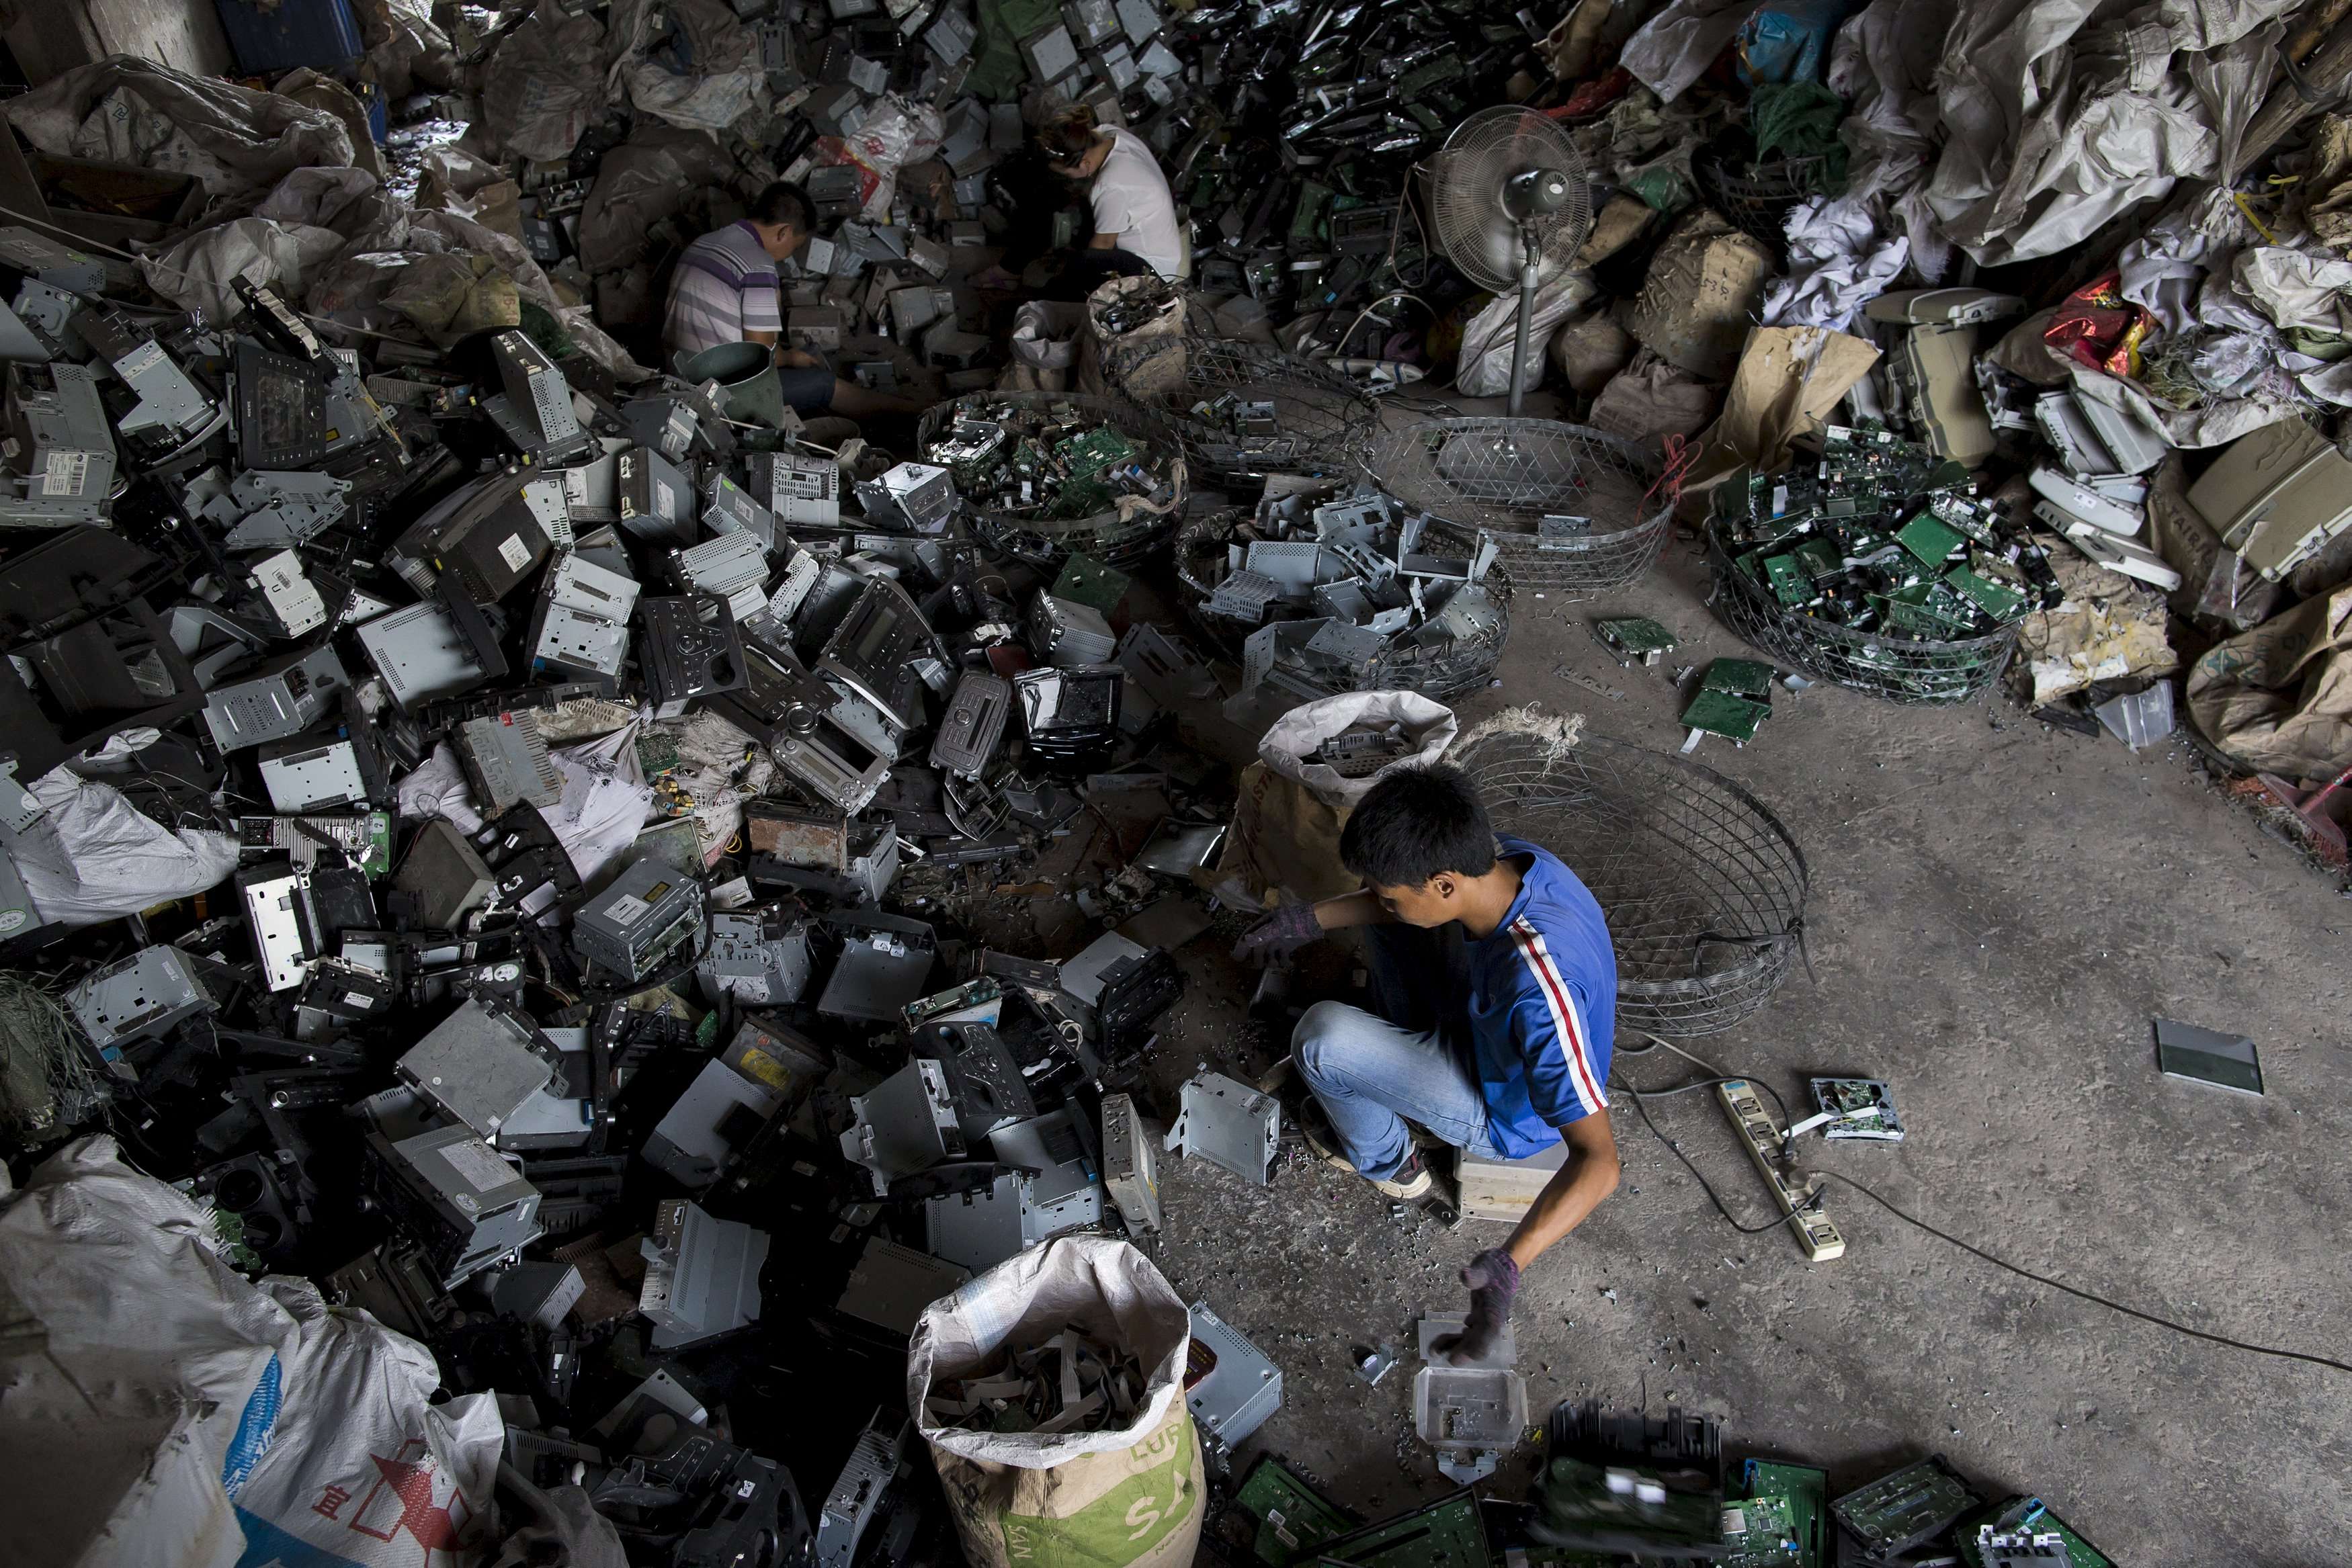 A worker recycles CD players at a workshop in Guiyu, in Guangdong. The town is known as one of the world’s largest electronic waste dump sites. Photo: Reuters